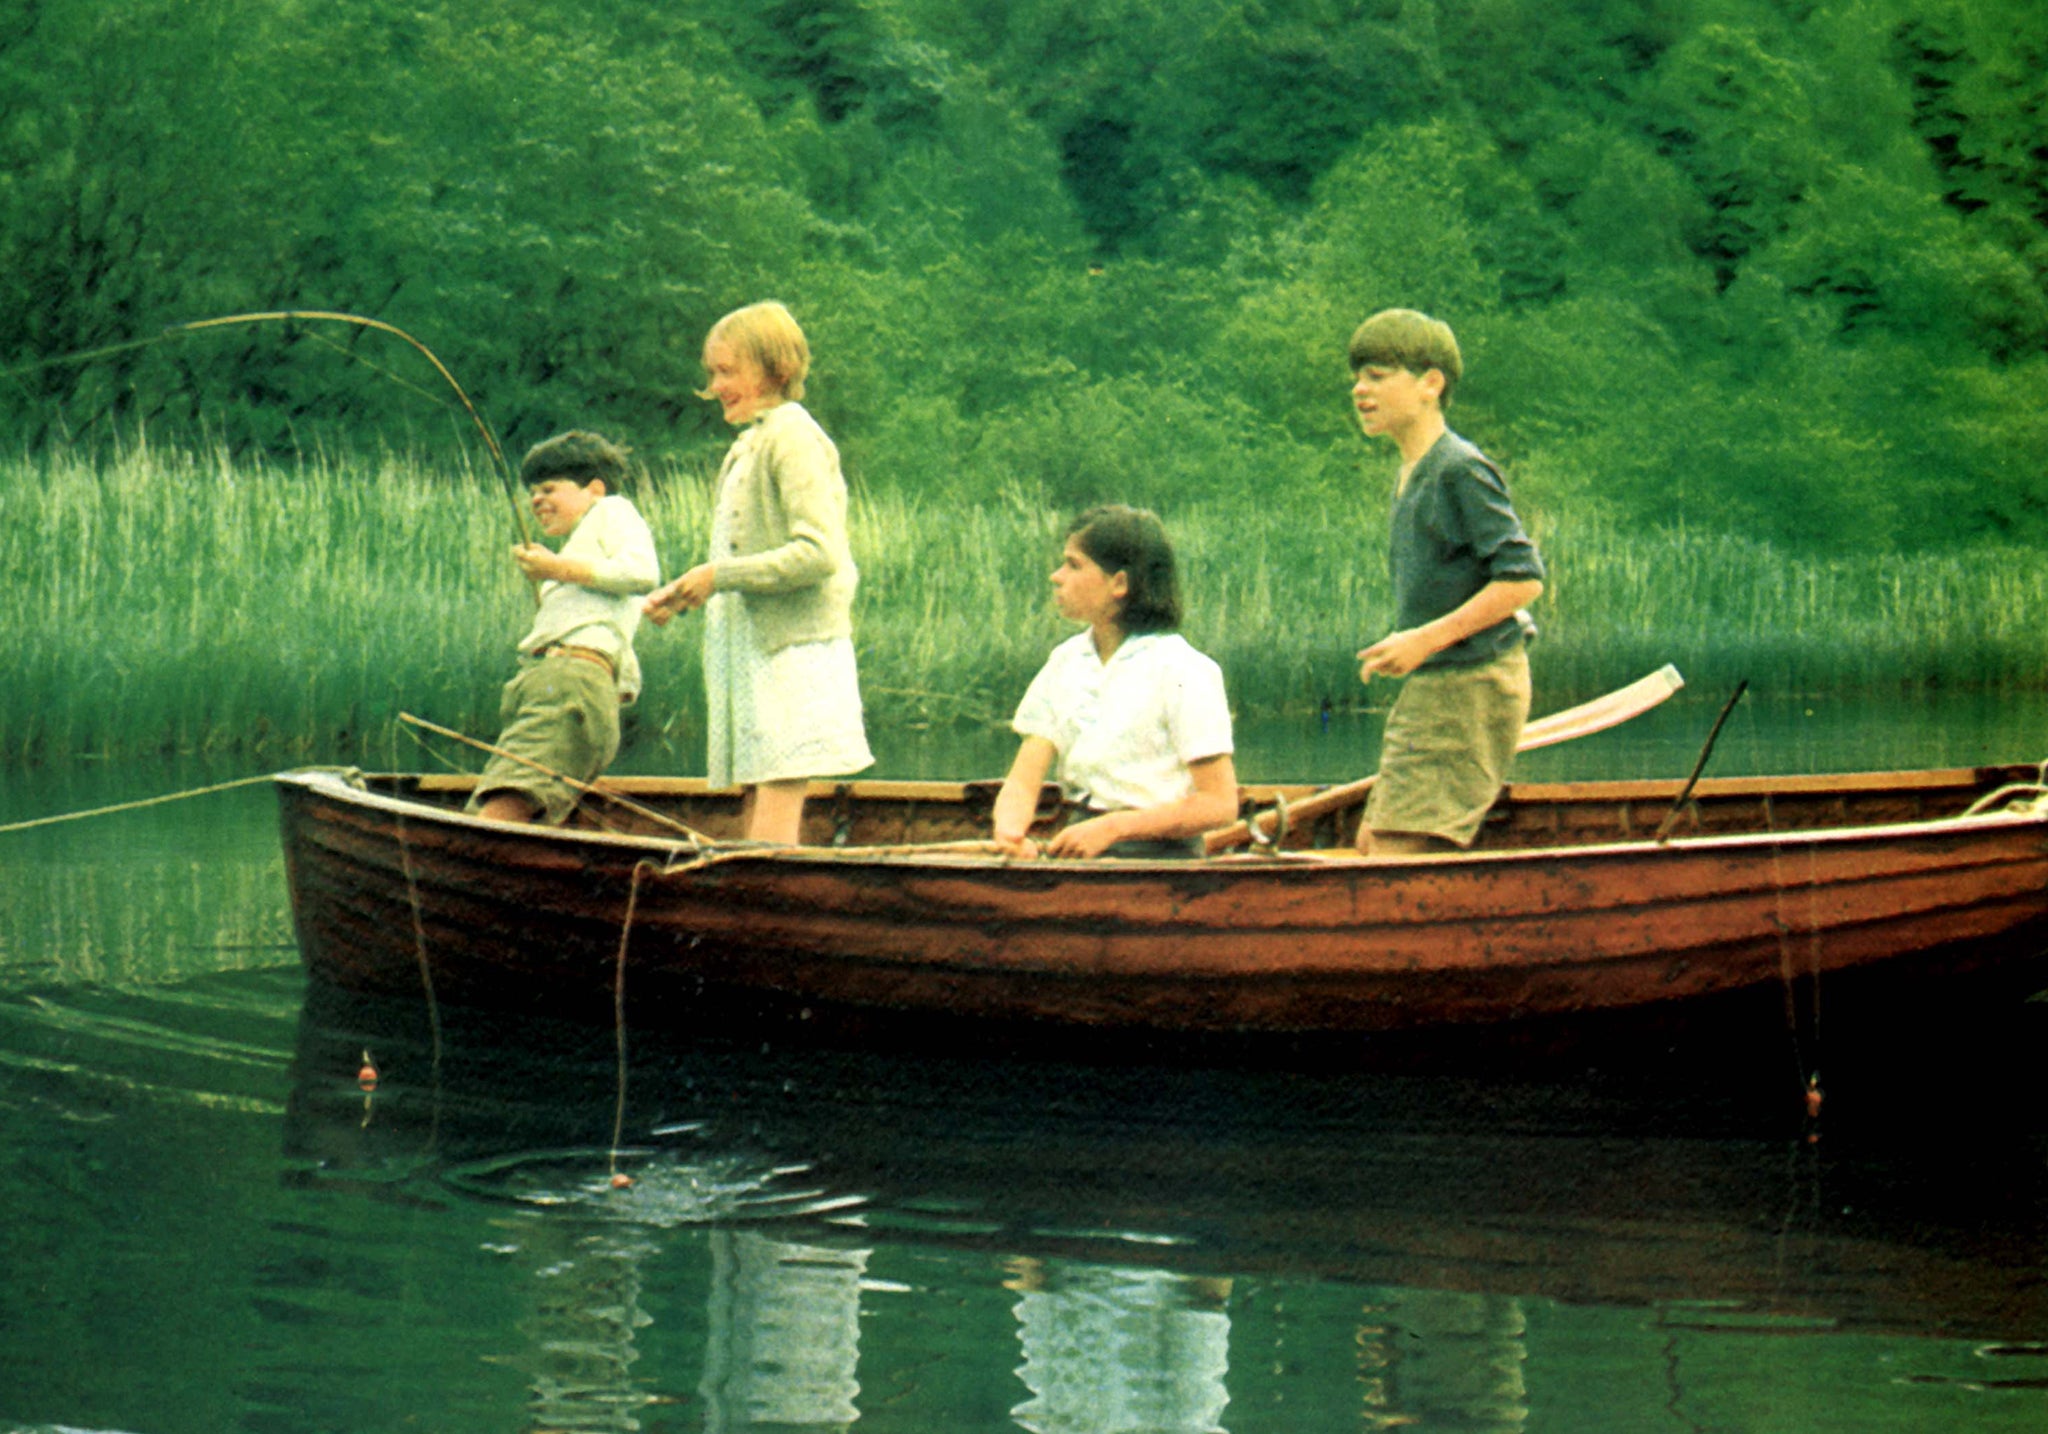 A 1974 film adaptation of Swallows and Amazons